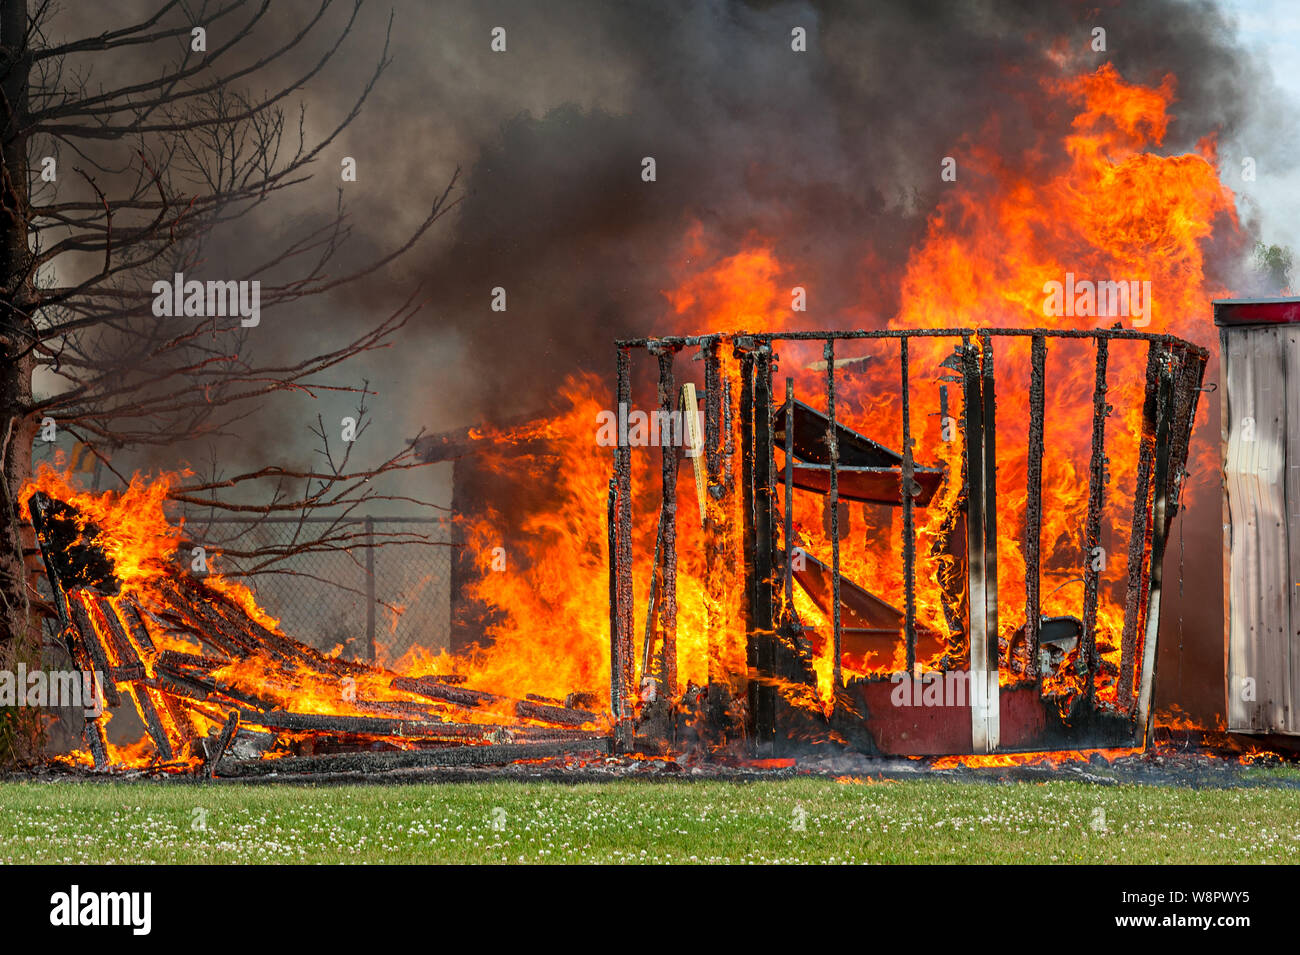 Raging fire destroys building structure Stock Photo